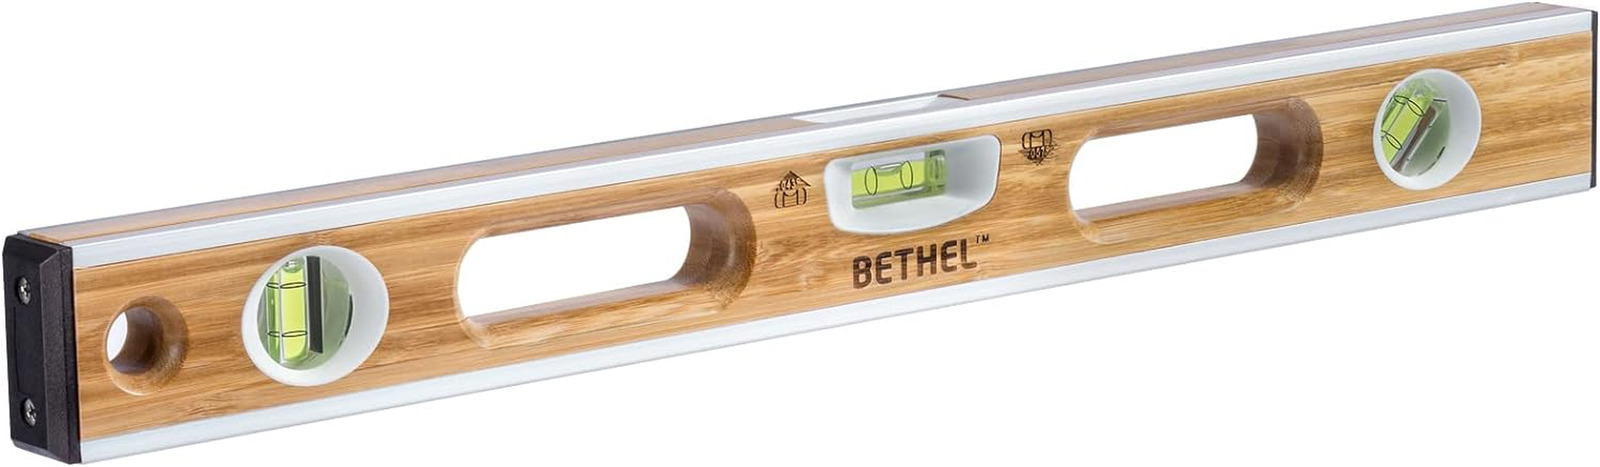 BETHEL Bamboo Level, 24 Inch Level & Tool Solid Block Acrylic Vials, Resists Mor